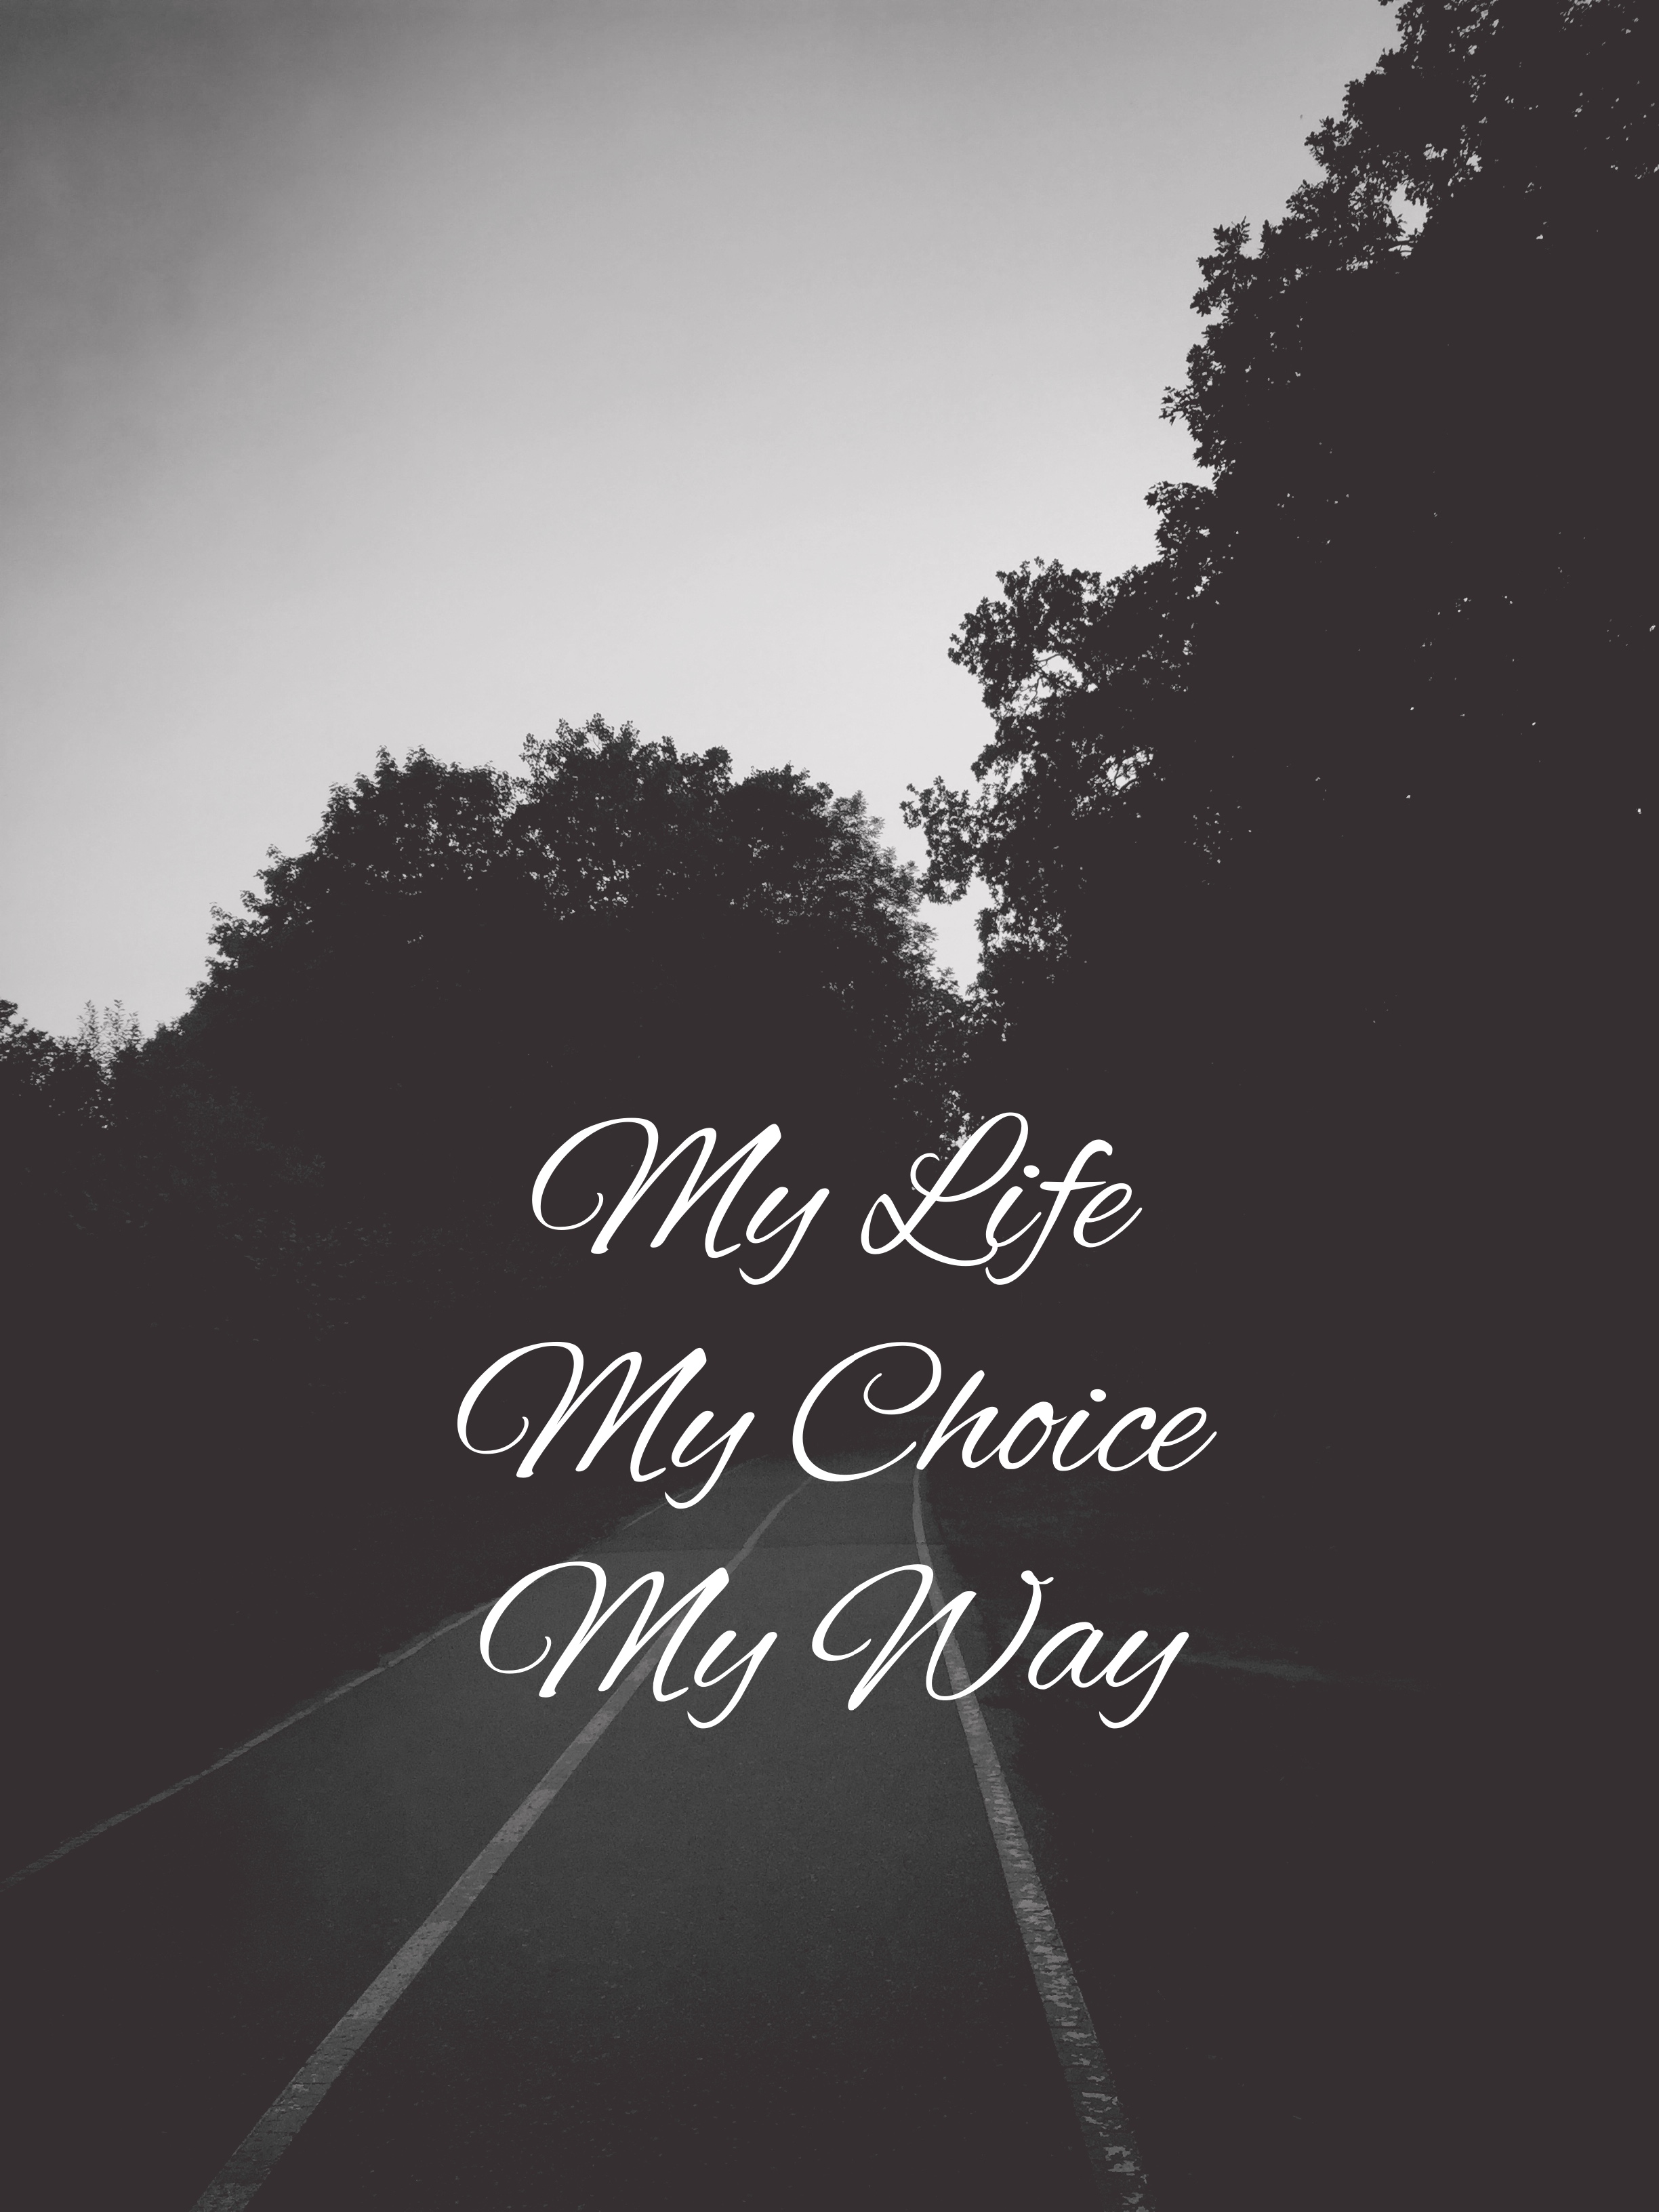 words, quotation, quote, bw, text, chb, inscription, road, path, way mobile wallpaper